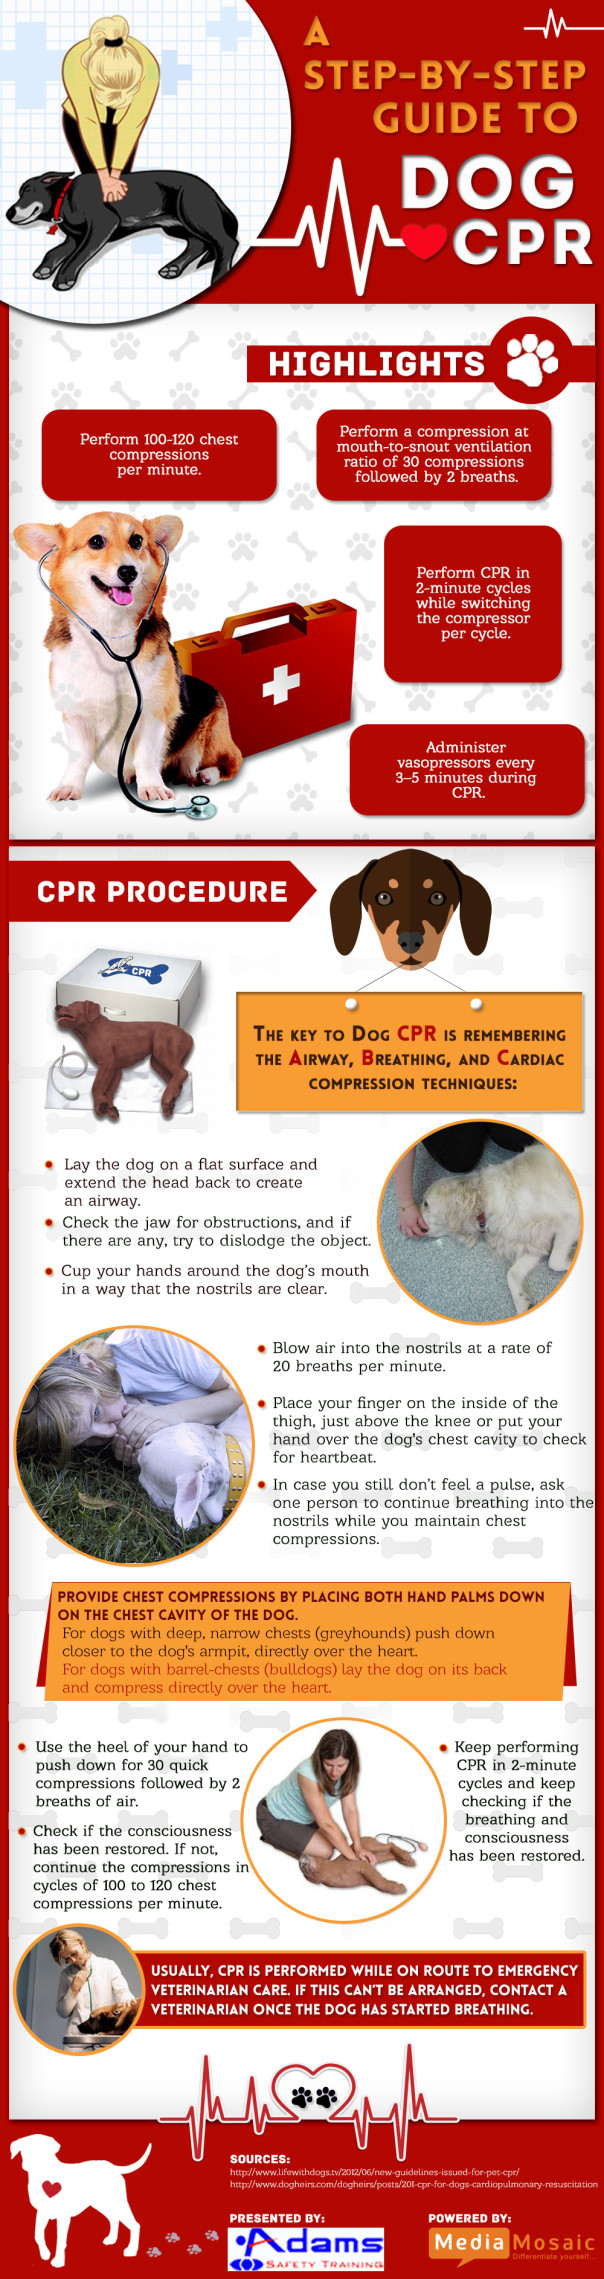 How to Perform CPR on a Dog